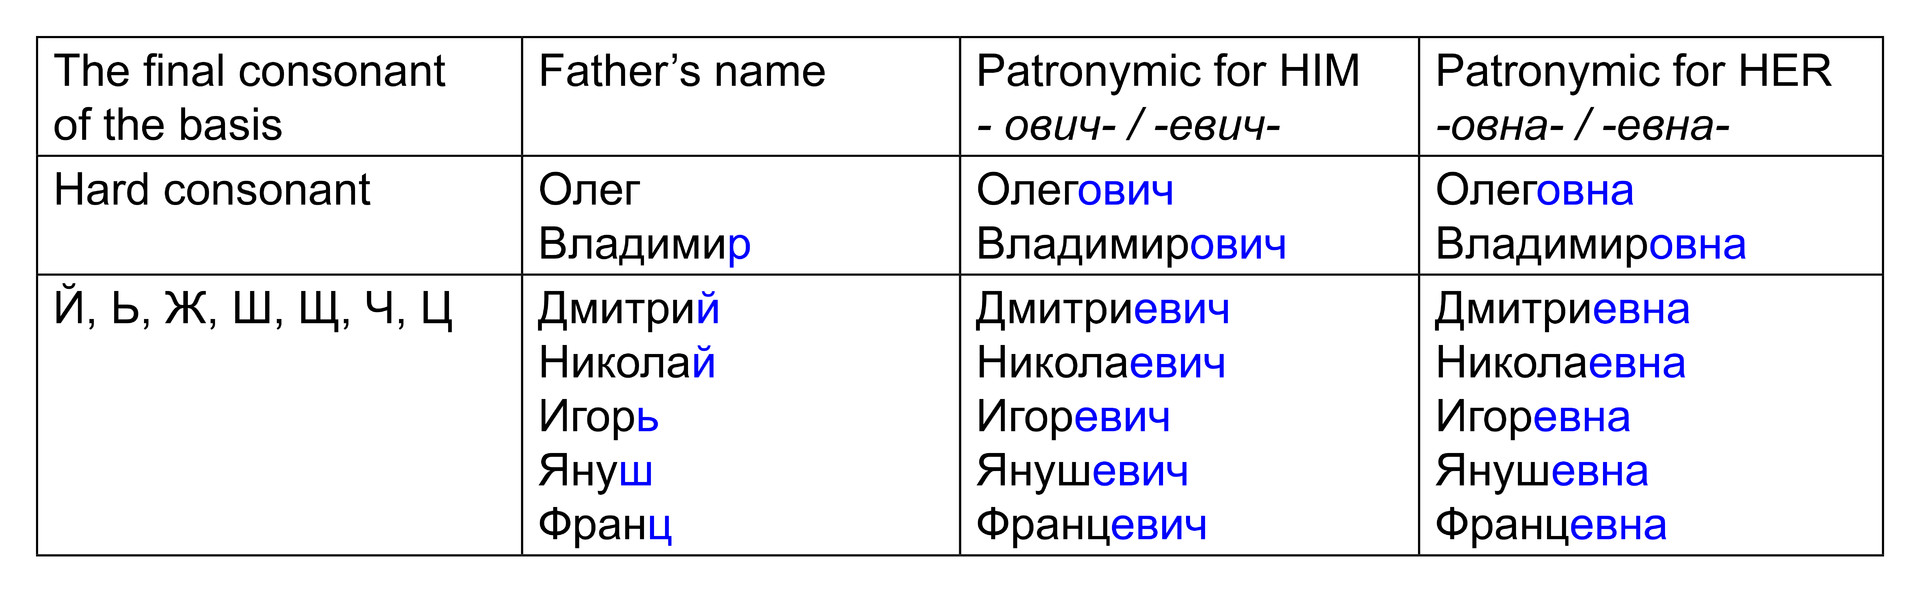  Table 1. Patronymic formation